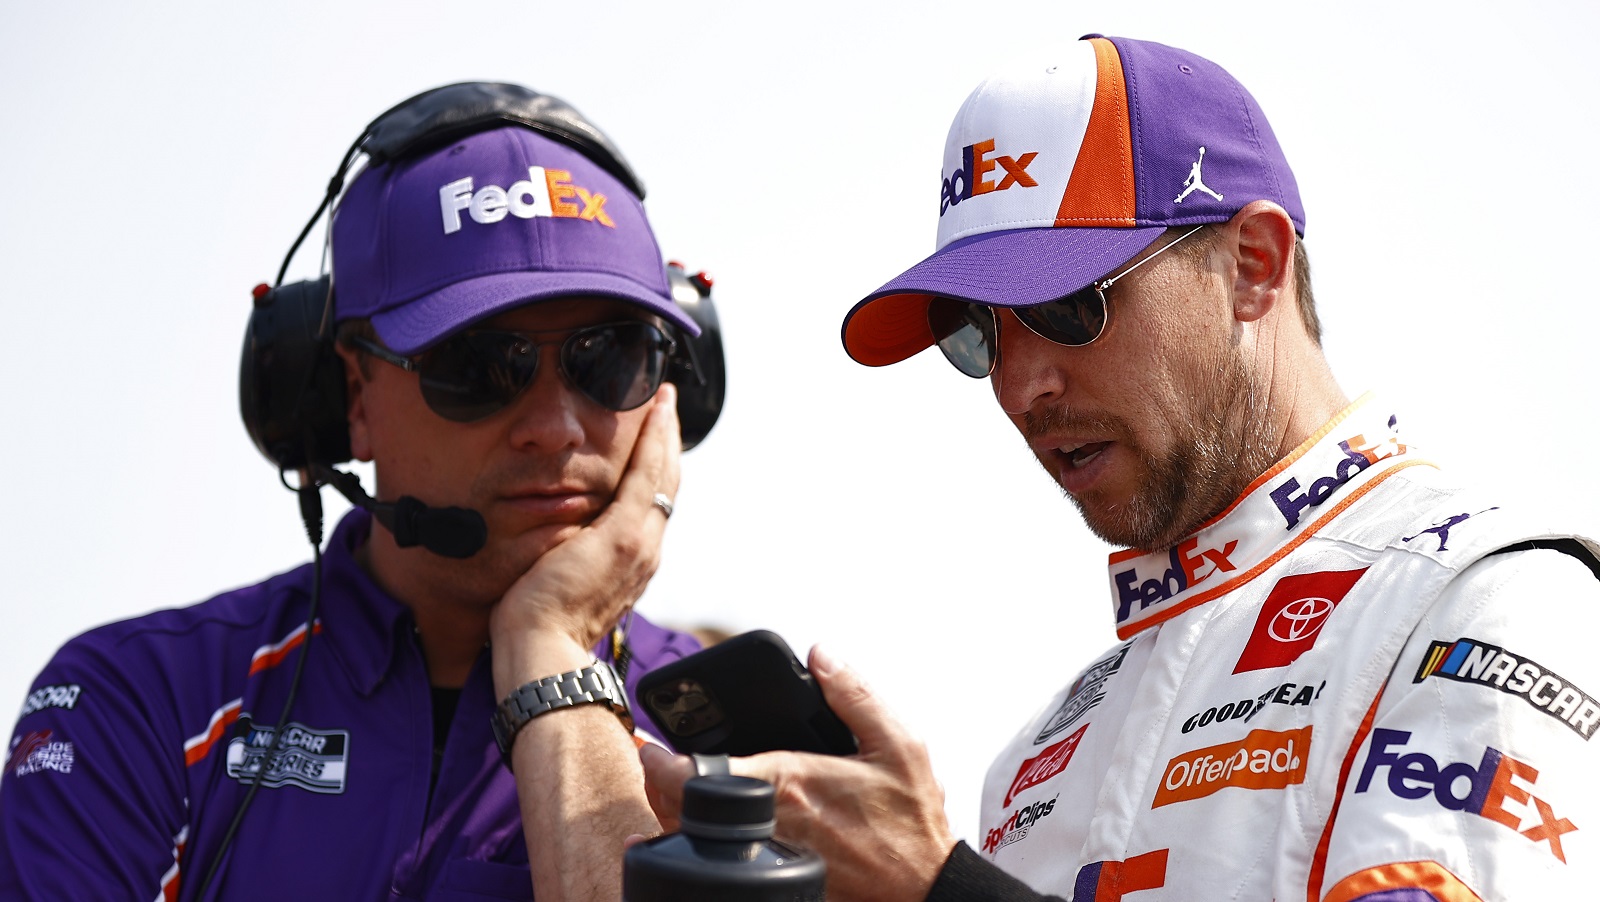 Denny Hamlin and crew chief Chris Gabehart talk on the grid during qualifying for the NASCAR Cup Series Jockey Made in America 250 at Road America on July 4, 2021.